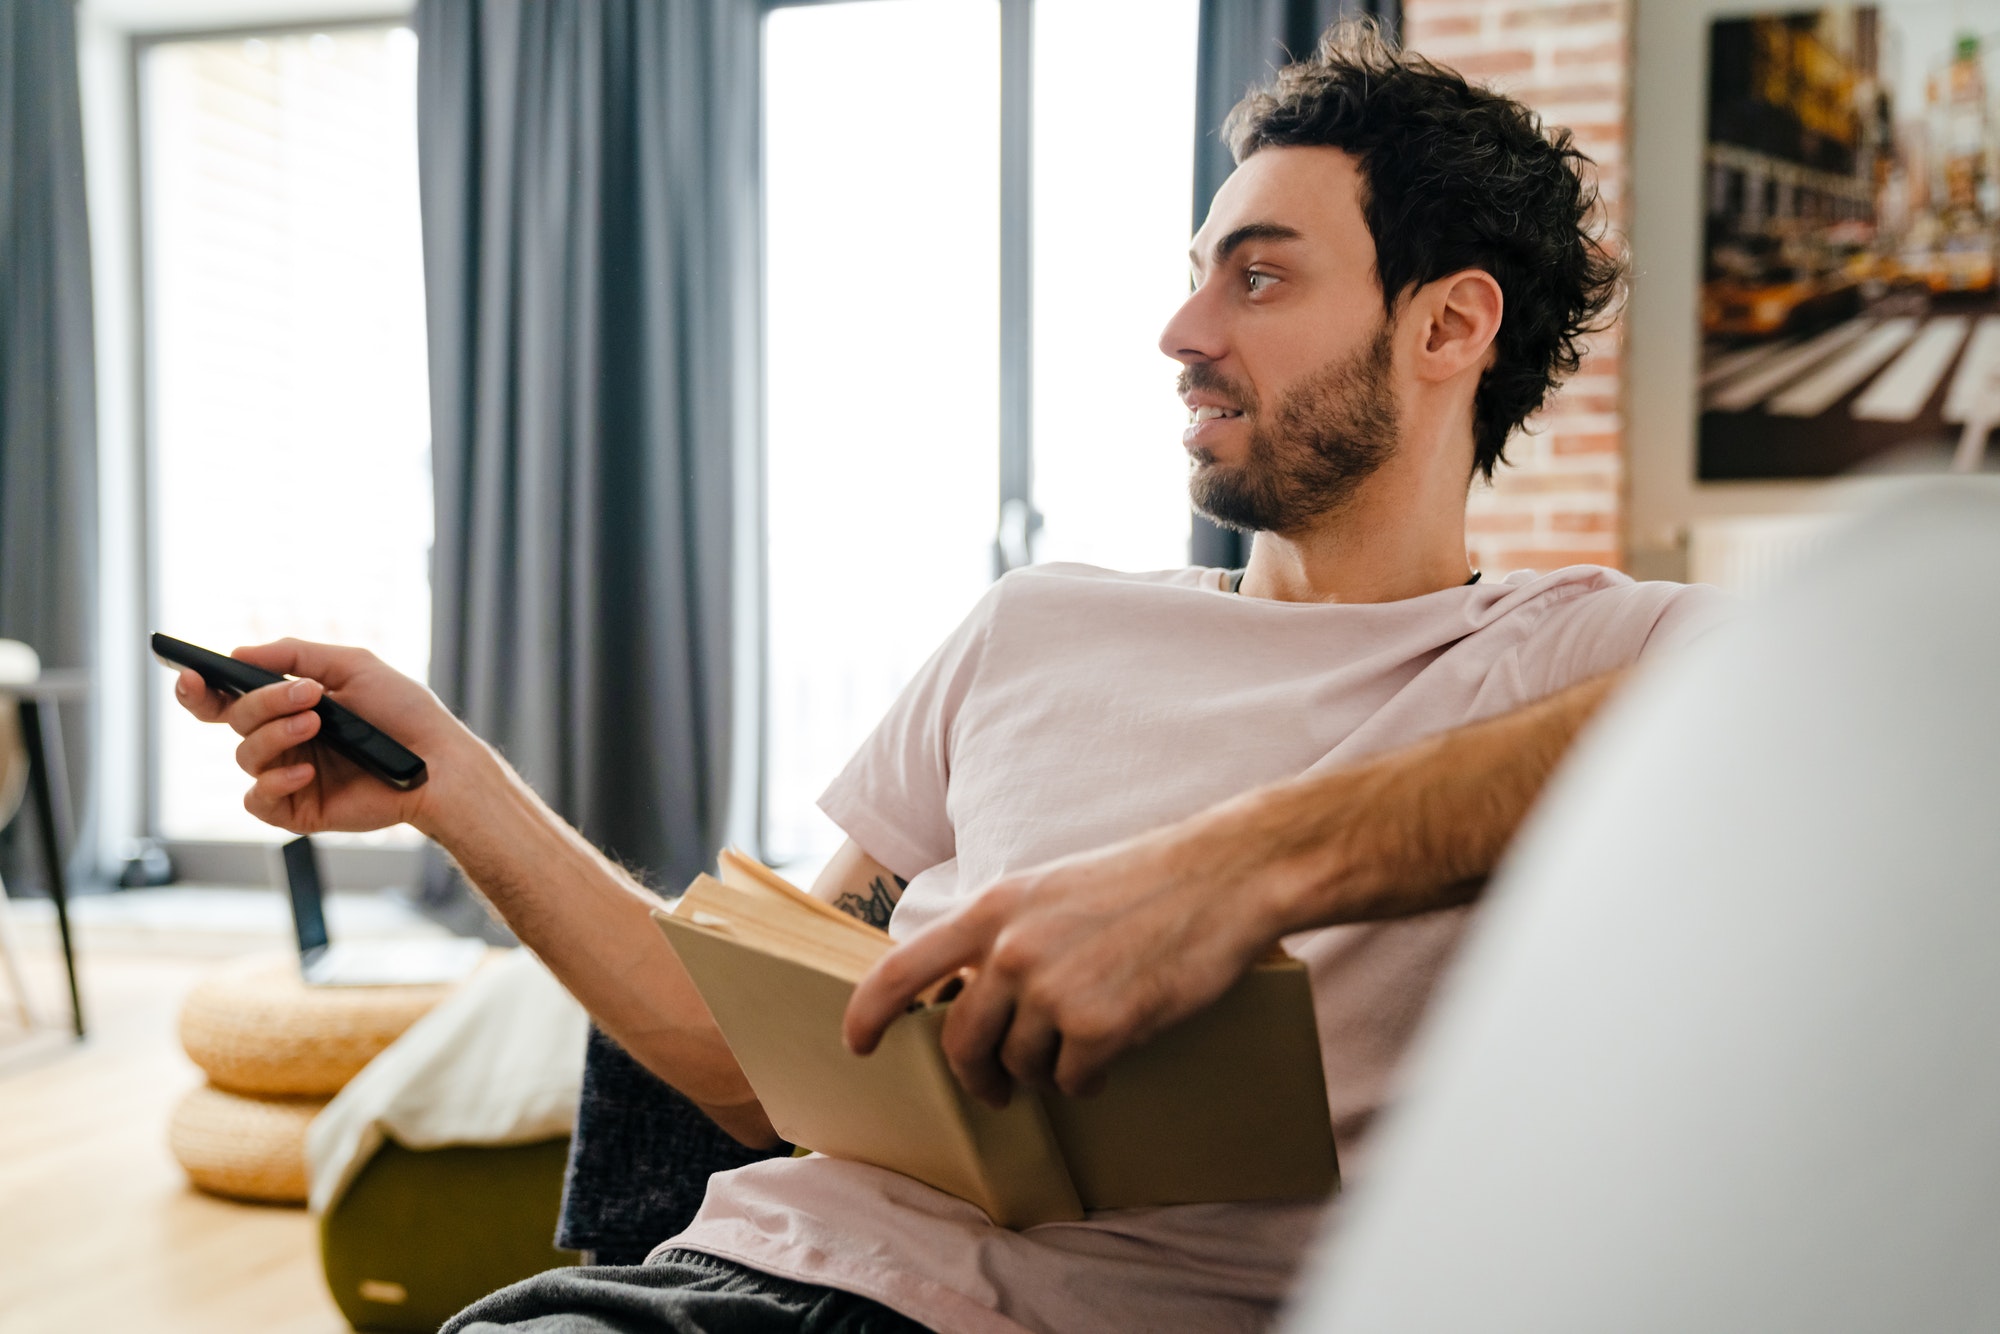 Handsome unshaven man using remote control while reading book on couch